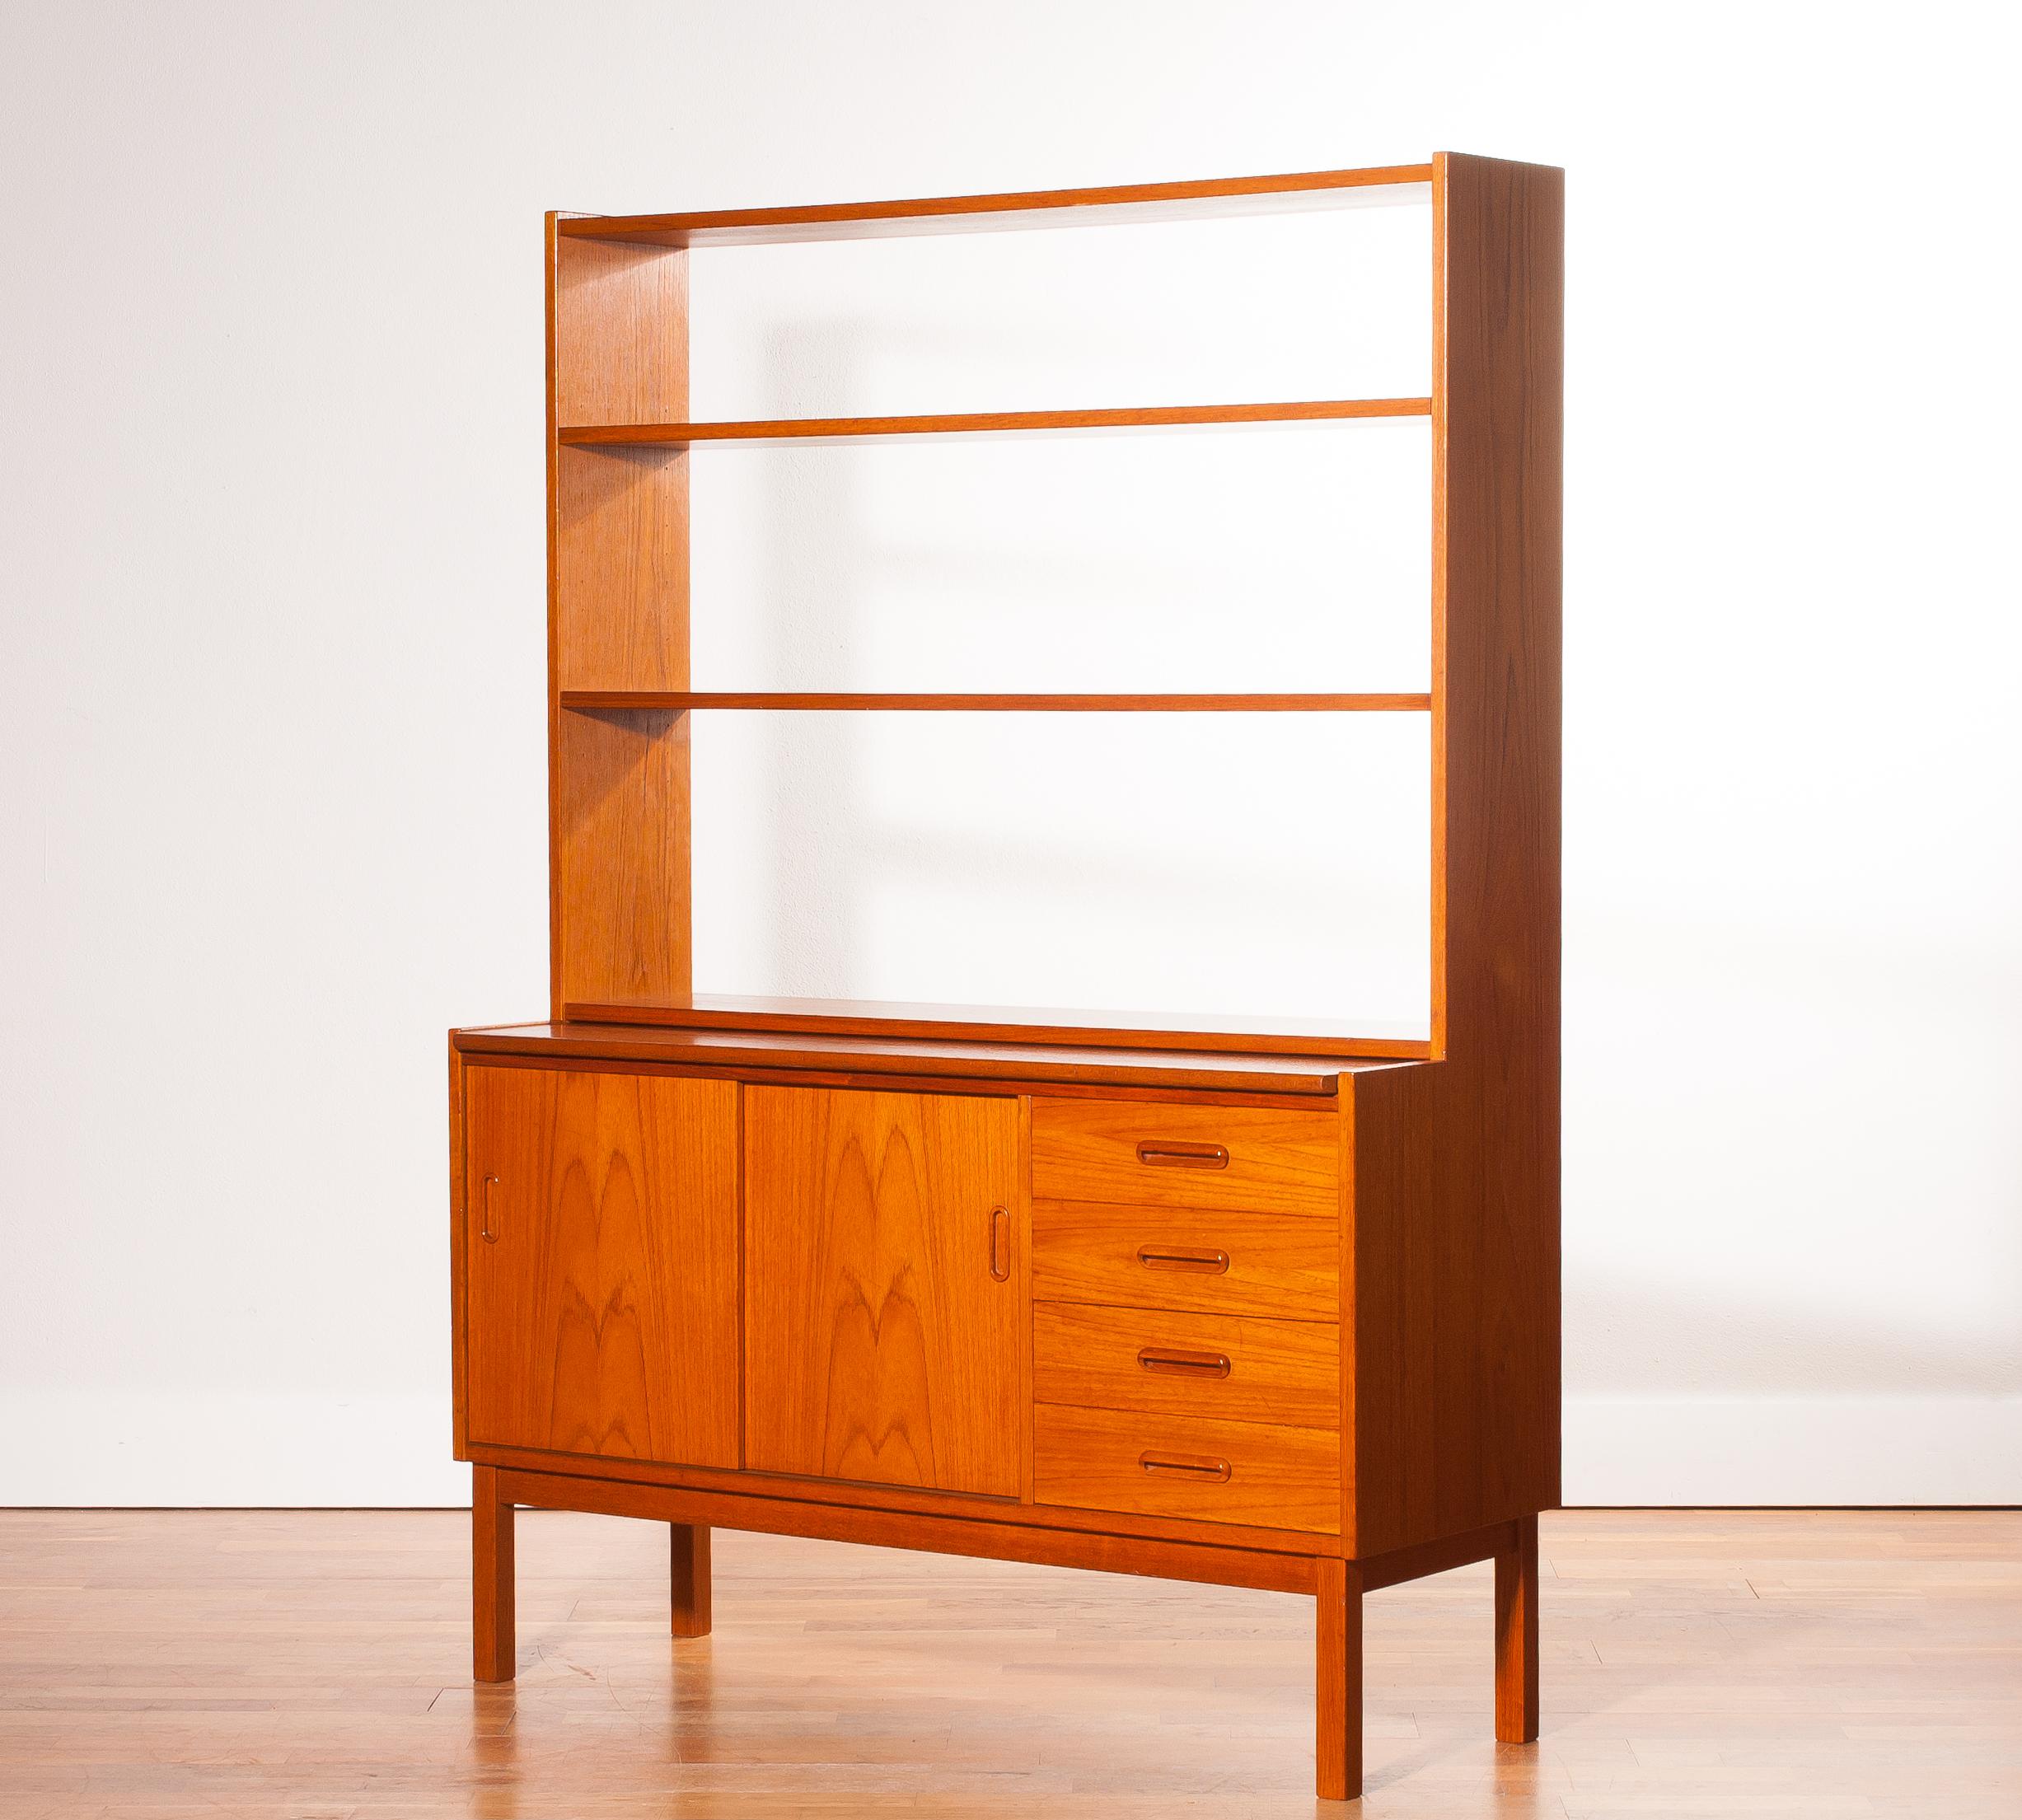 Swedish 1960s, Teak Book Case with Slidable Writing / Working Space from Sweden